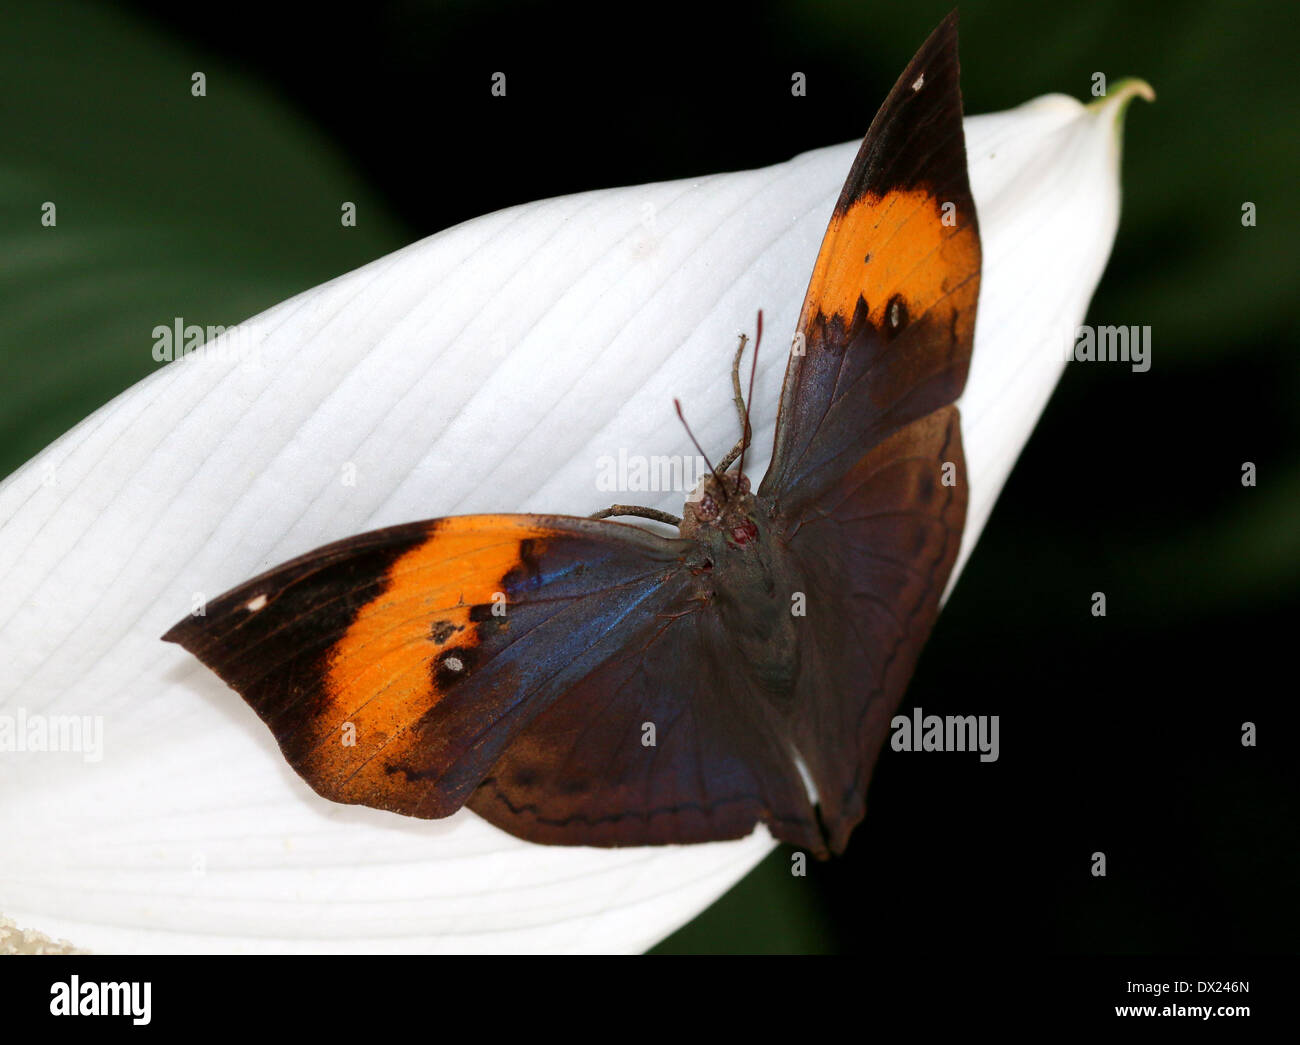 Orange Oakleaf or Indian Dead Leaf Butterfly (Kallima inachus) with wings opened on a tropical flower Stock Photo